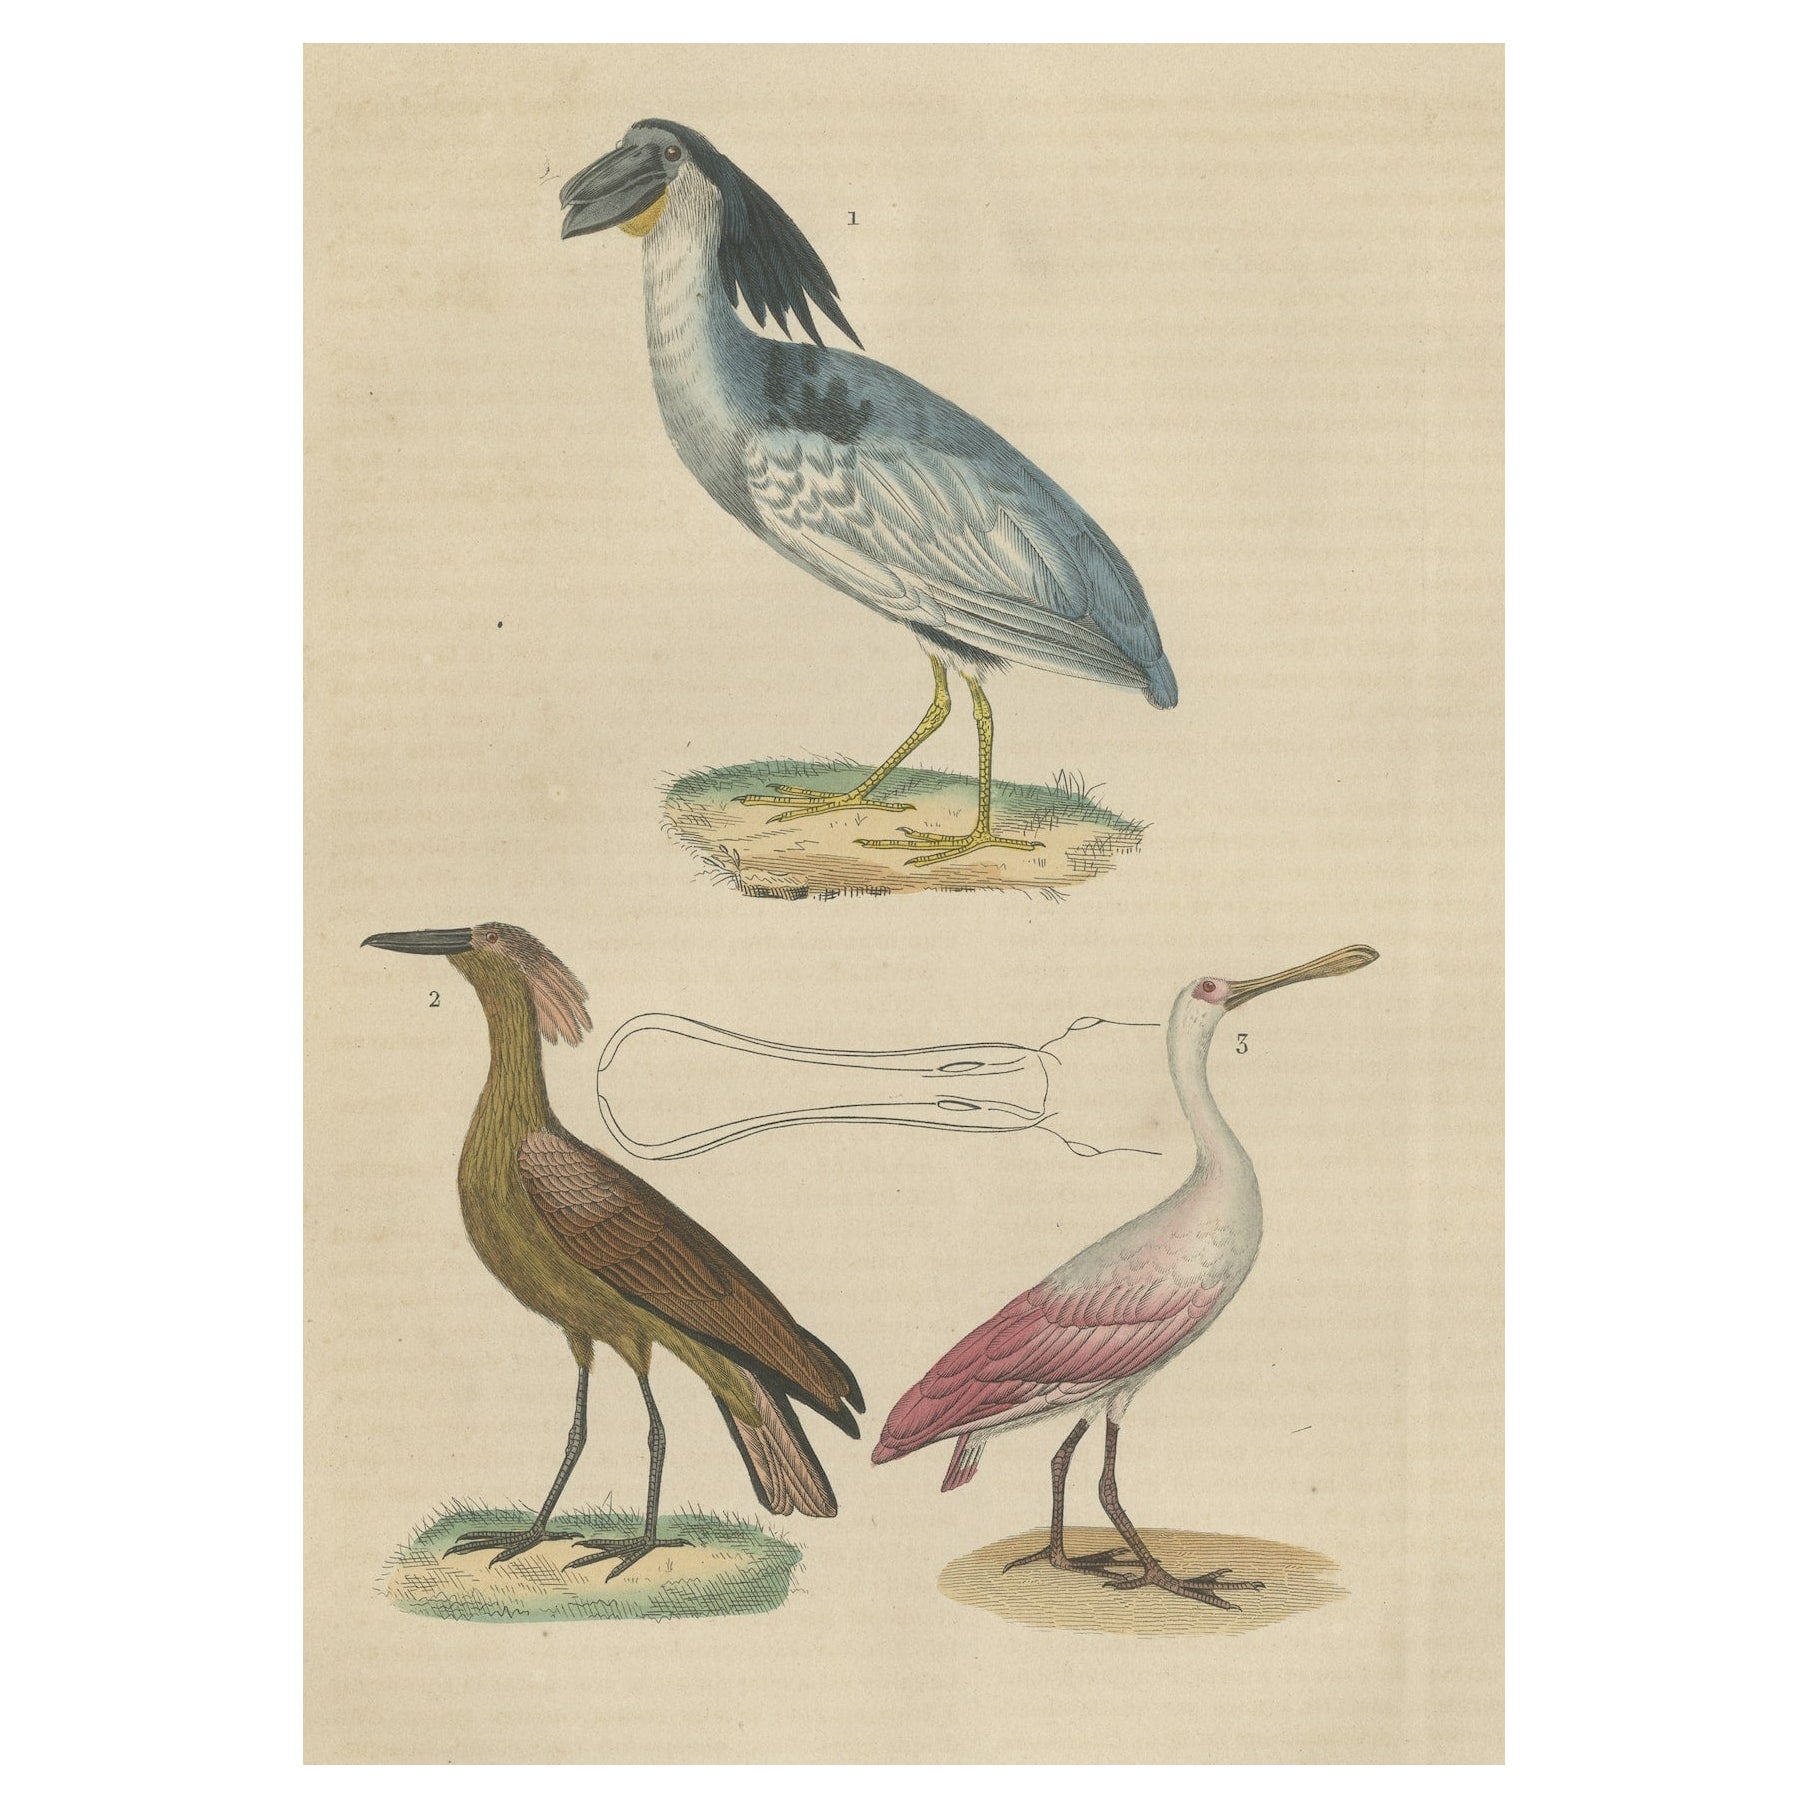 Original Hand-Colored Print of a Boatbill, Hammerhead and a Pink Spoonbill Bird For Sale